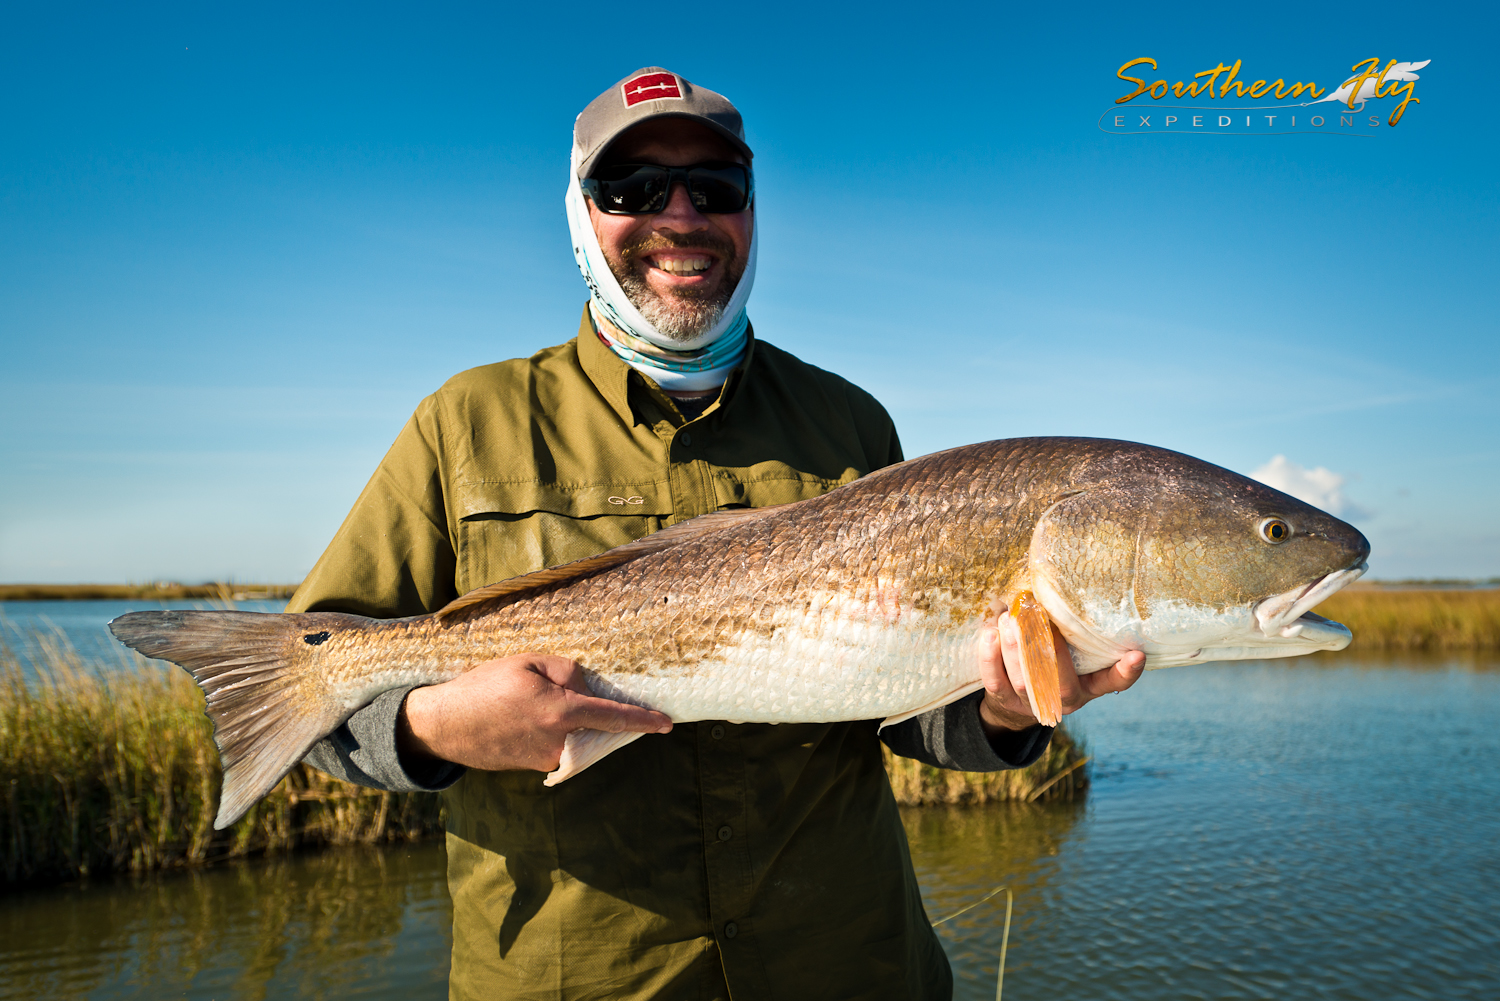 Boloxi Marsh Yields Action in Fly Fishing